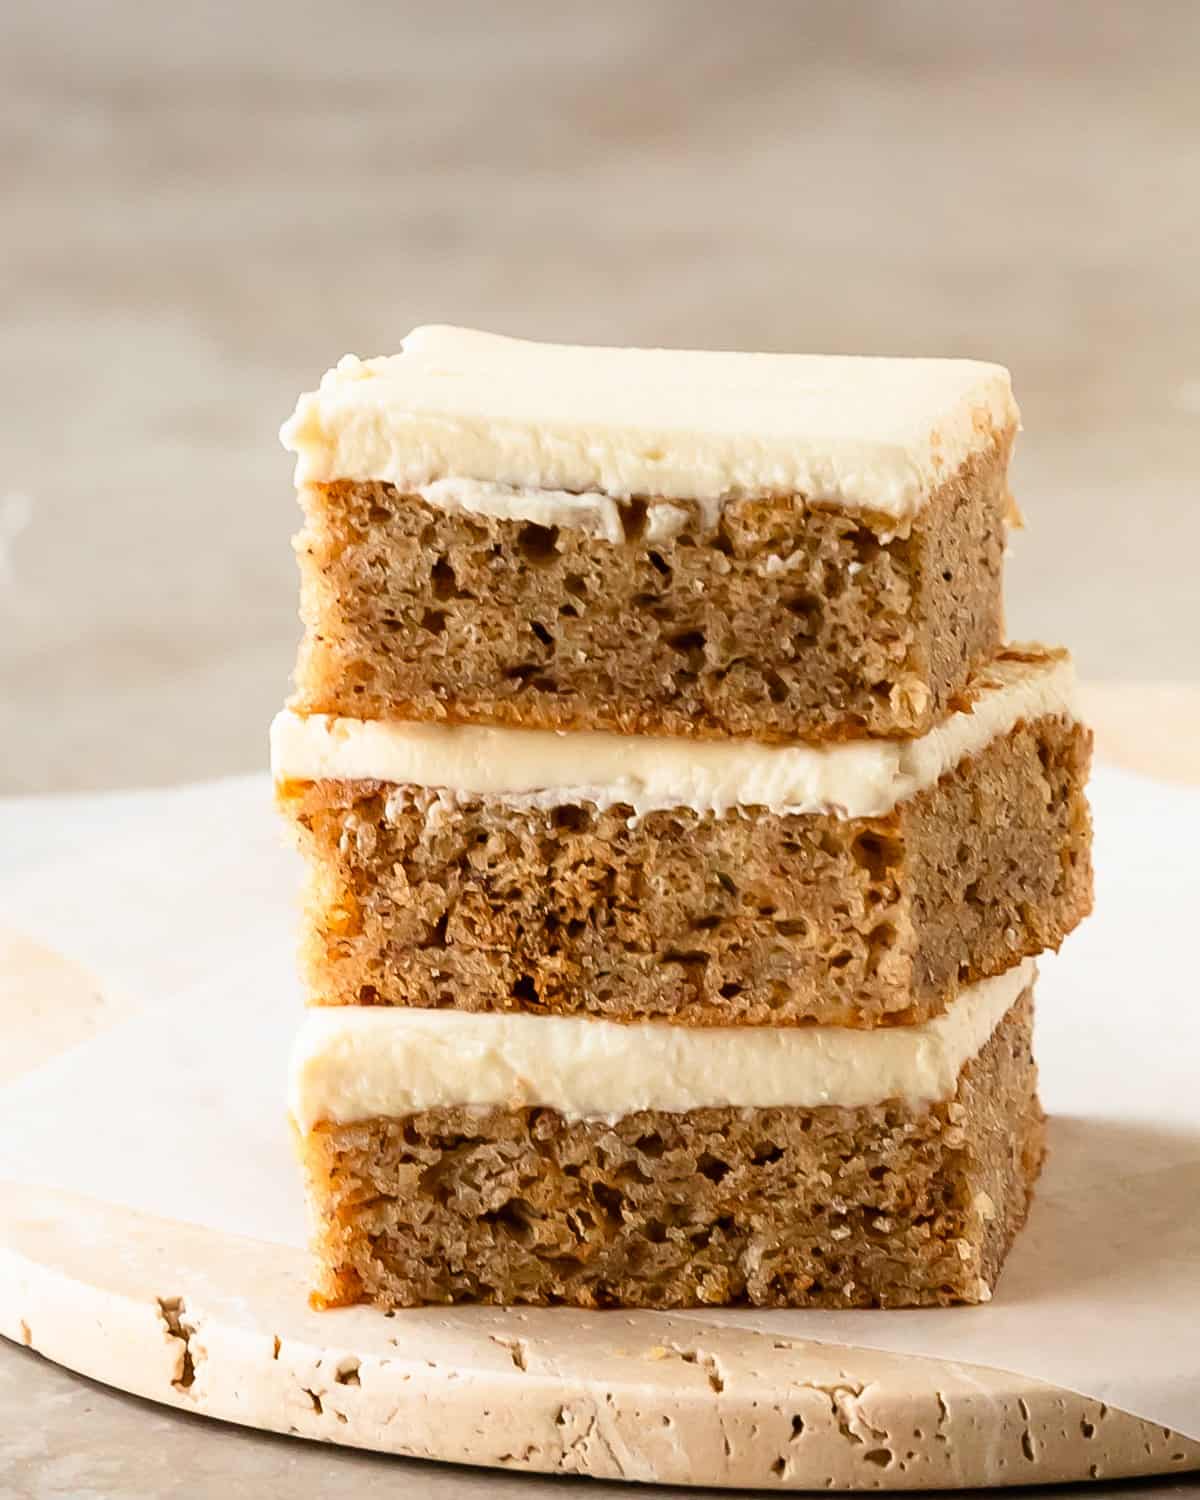 Banana bars with cream cheese frosting are soft, moist and flavorful banana cake bars; topped with a rich and sweet cream cheese frosting. Grab two bowls and a whisk to make this sheet cake banana bars recipe the next time you need a quick and easy dessert that everyone is sure to love!